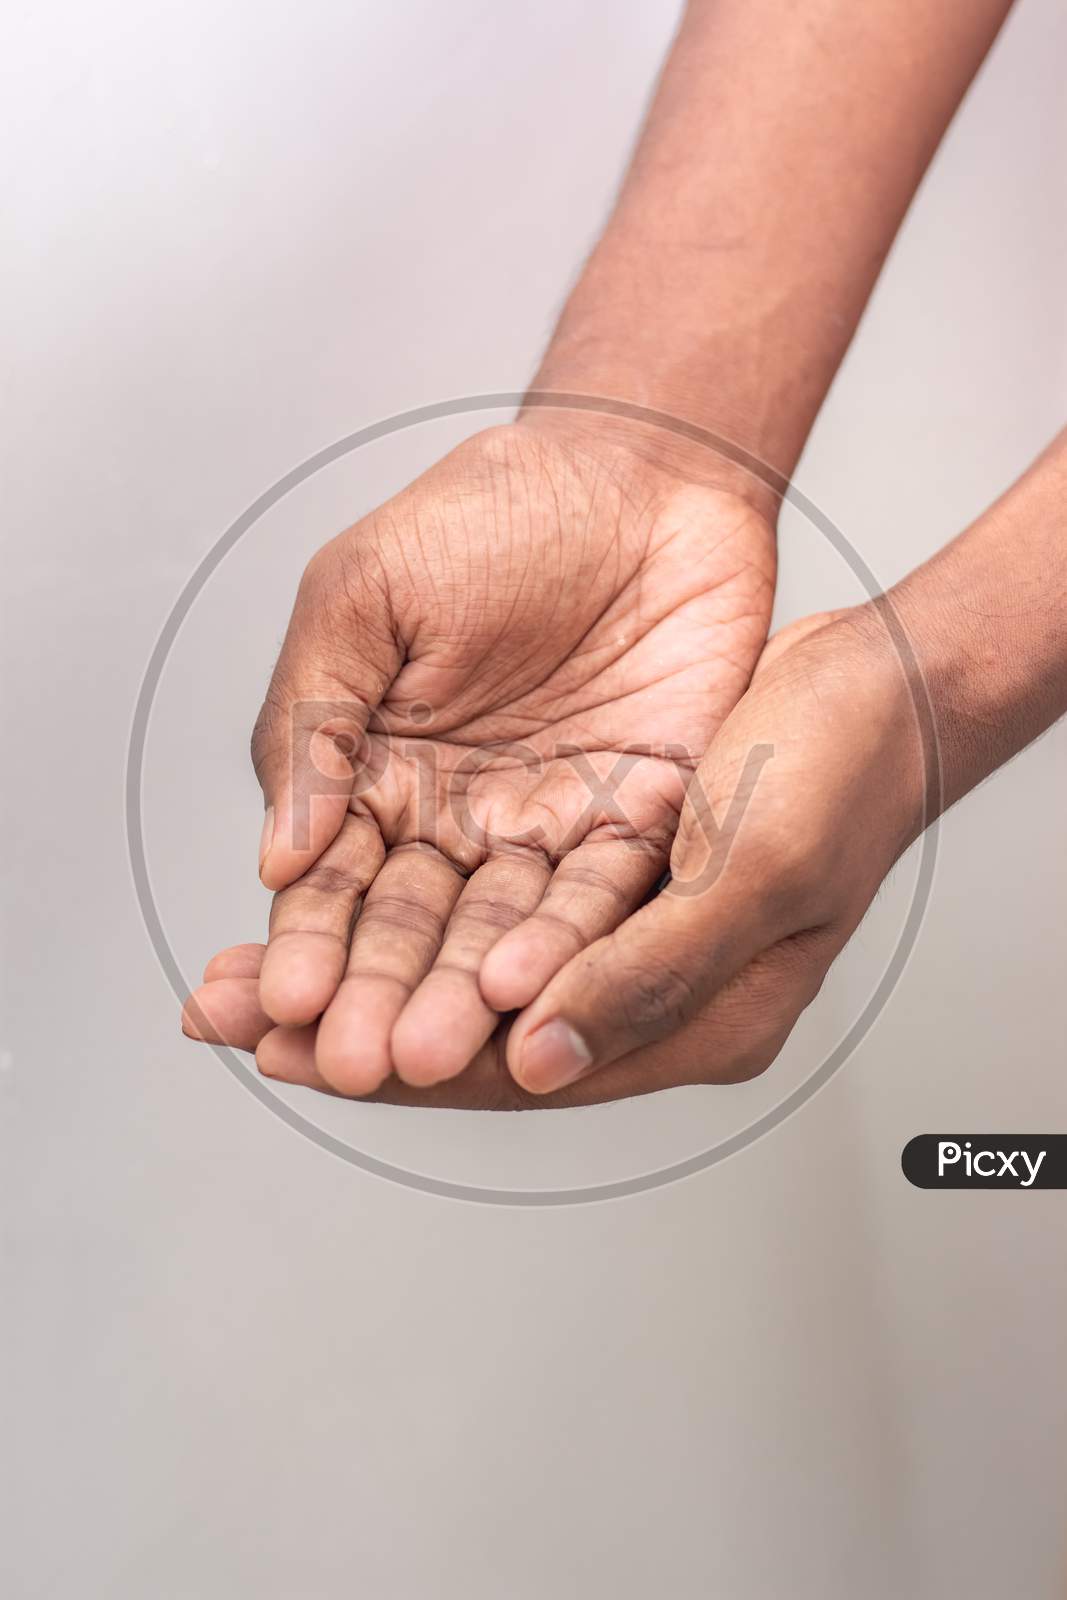 Beggar Hand Signs - Hand Man Holds A Handful, Hands Together. Two Hands With Open Palms Both Tightly Together - International Hand Gesture Isolated On White Background With Copy Space